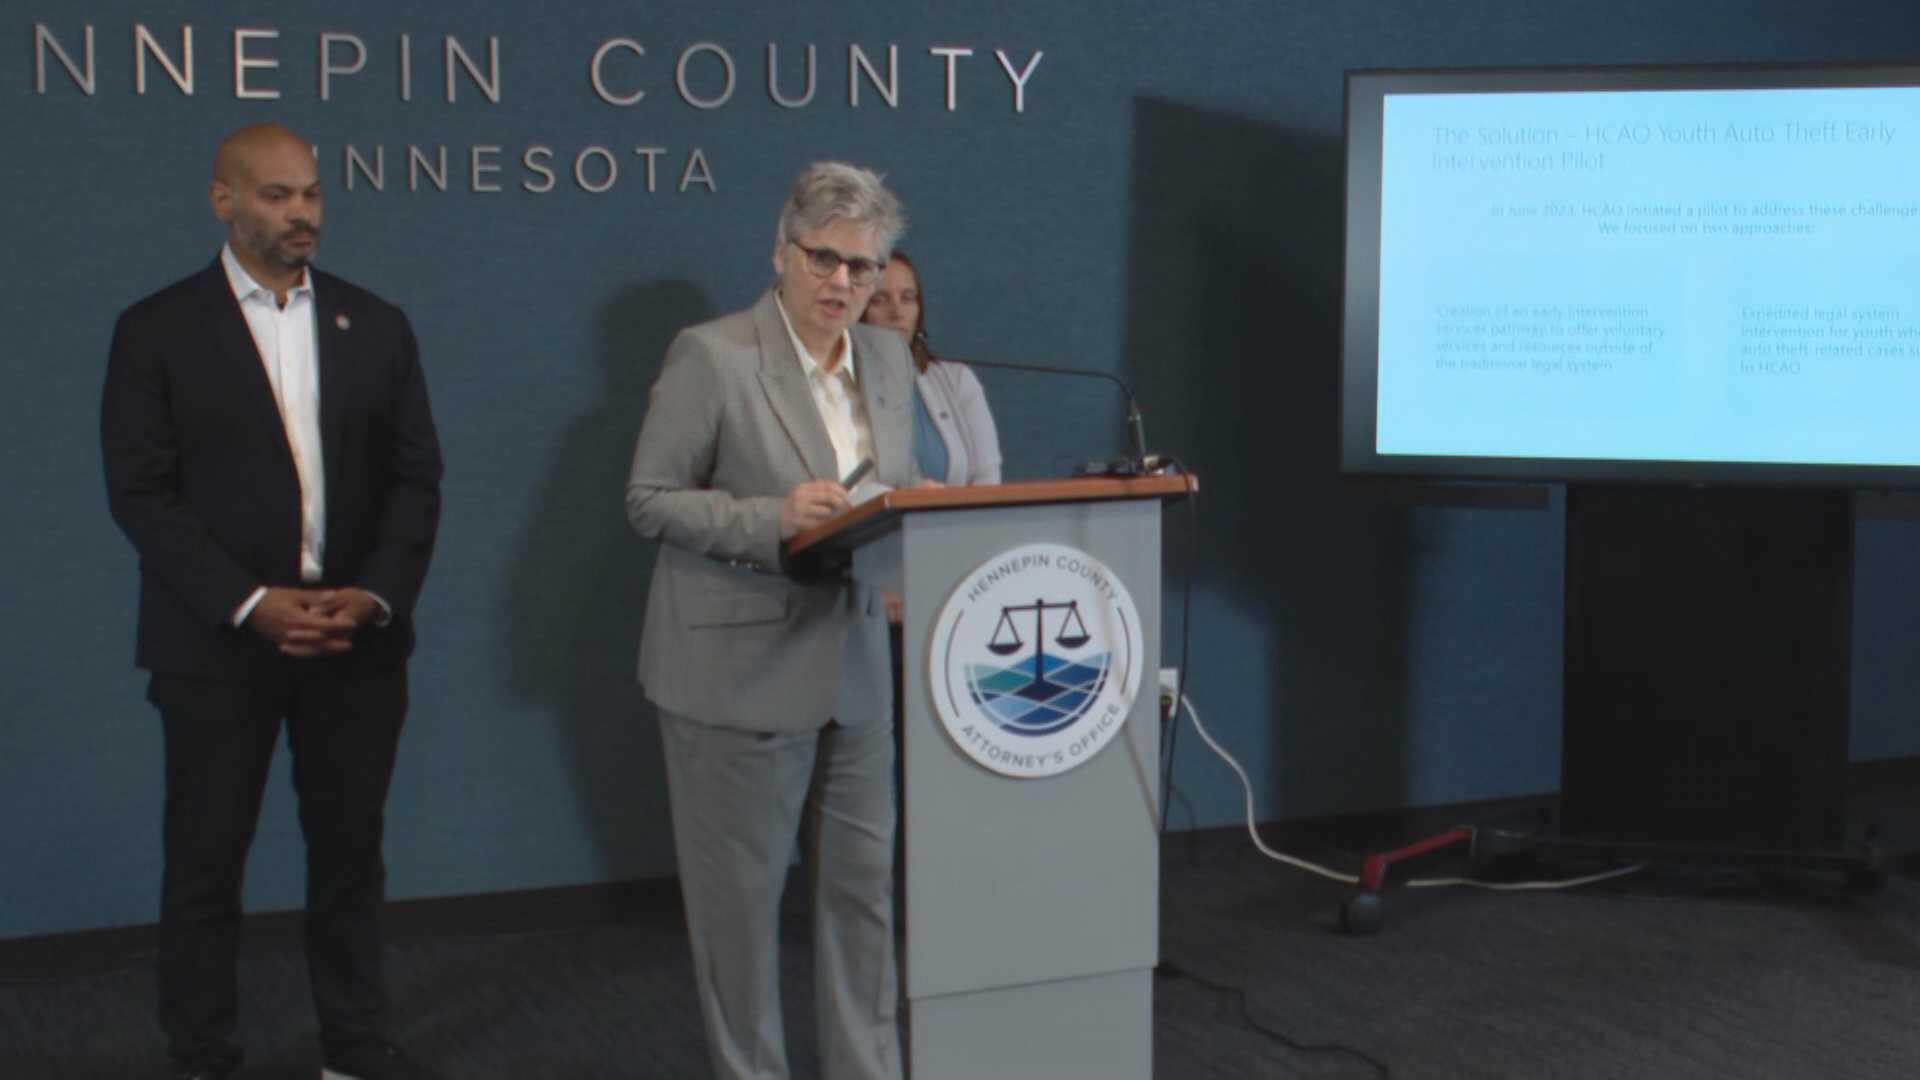 Hennepin County Attorney Mary Moriarty revealed data from a year-long program that successfully helped reduce youth auto thefts and subsequent reoffending.